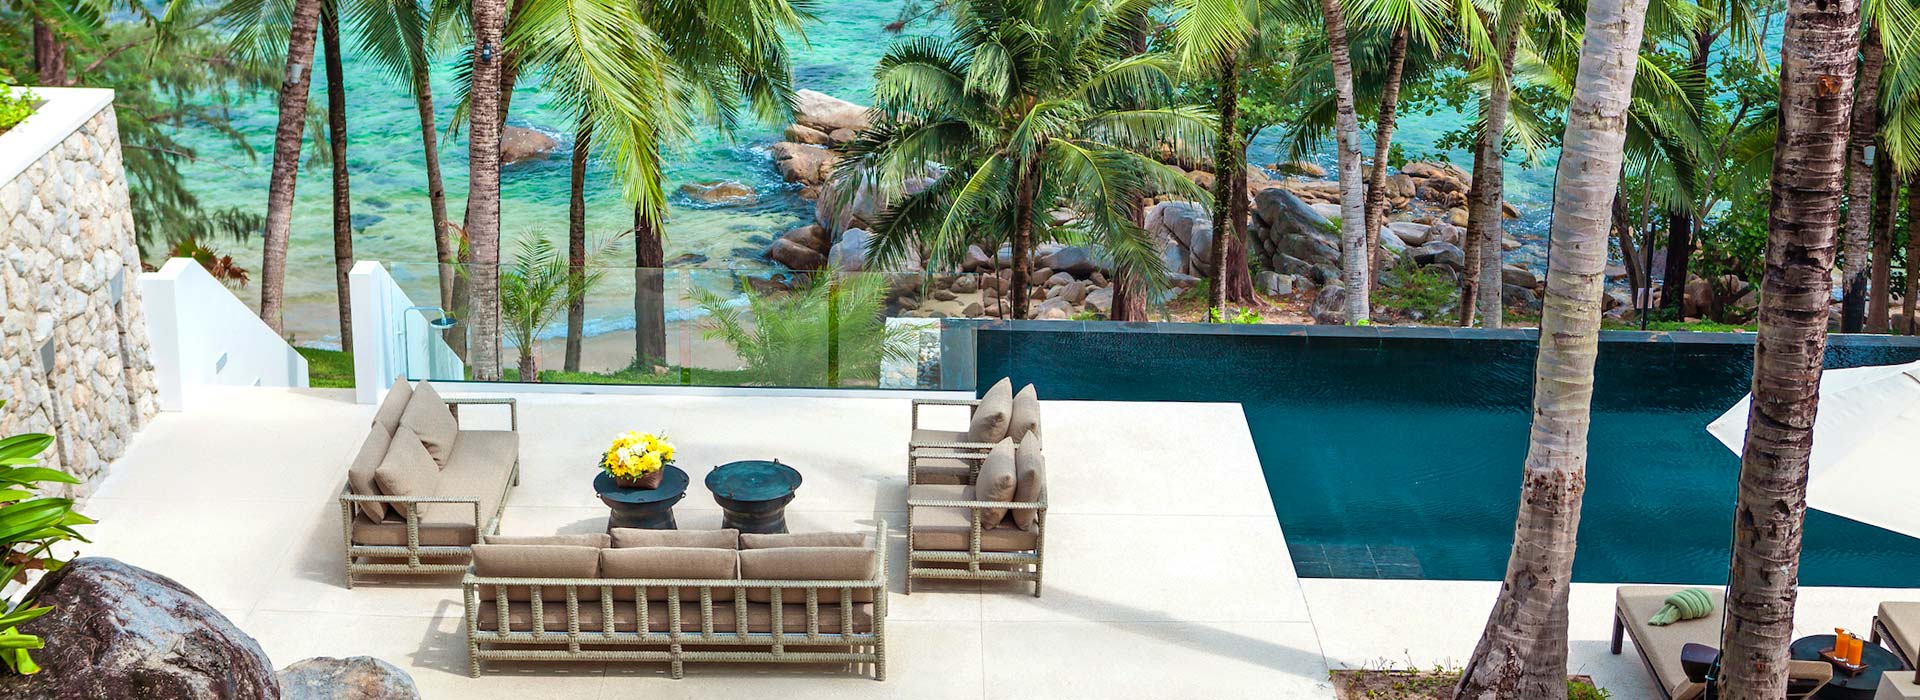 Villa Analaya 6 Bedrooms<br>with private pool